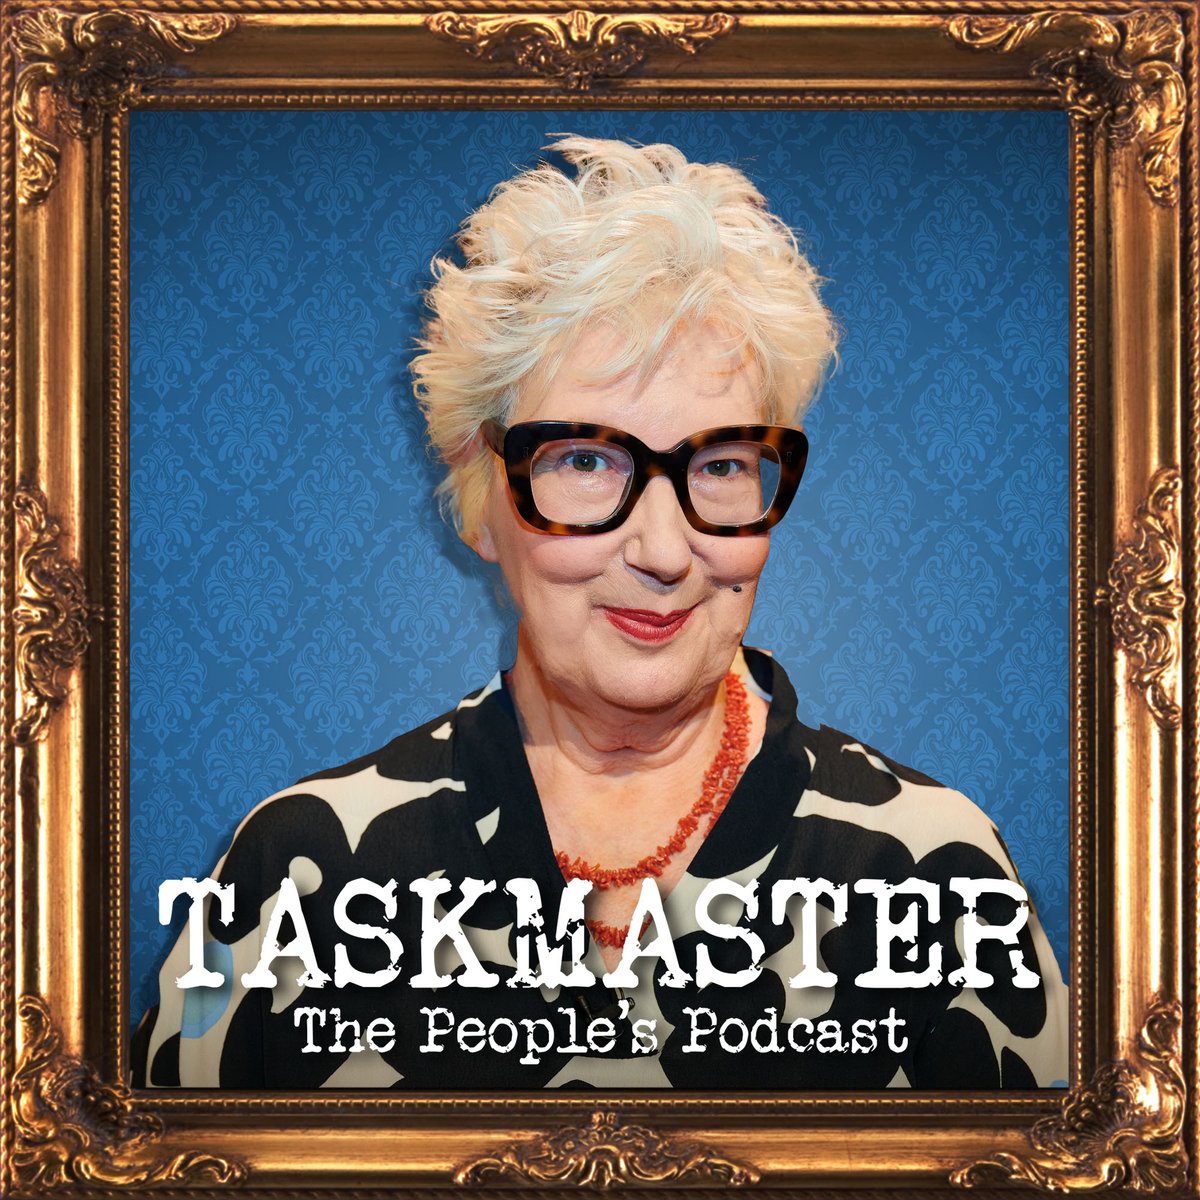 Brace! Brace! Your new co-host of Taskmaster: The People's Podcast is the one and only @jennyeclair! Subscribe to the podcast now for a new episode arriving today. podfollow.com/1619305860